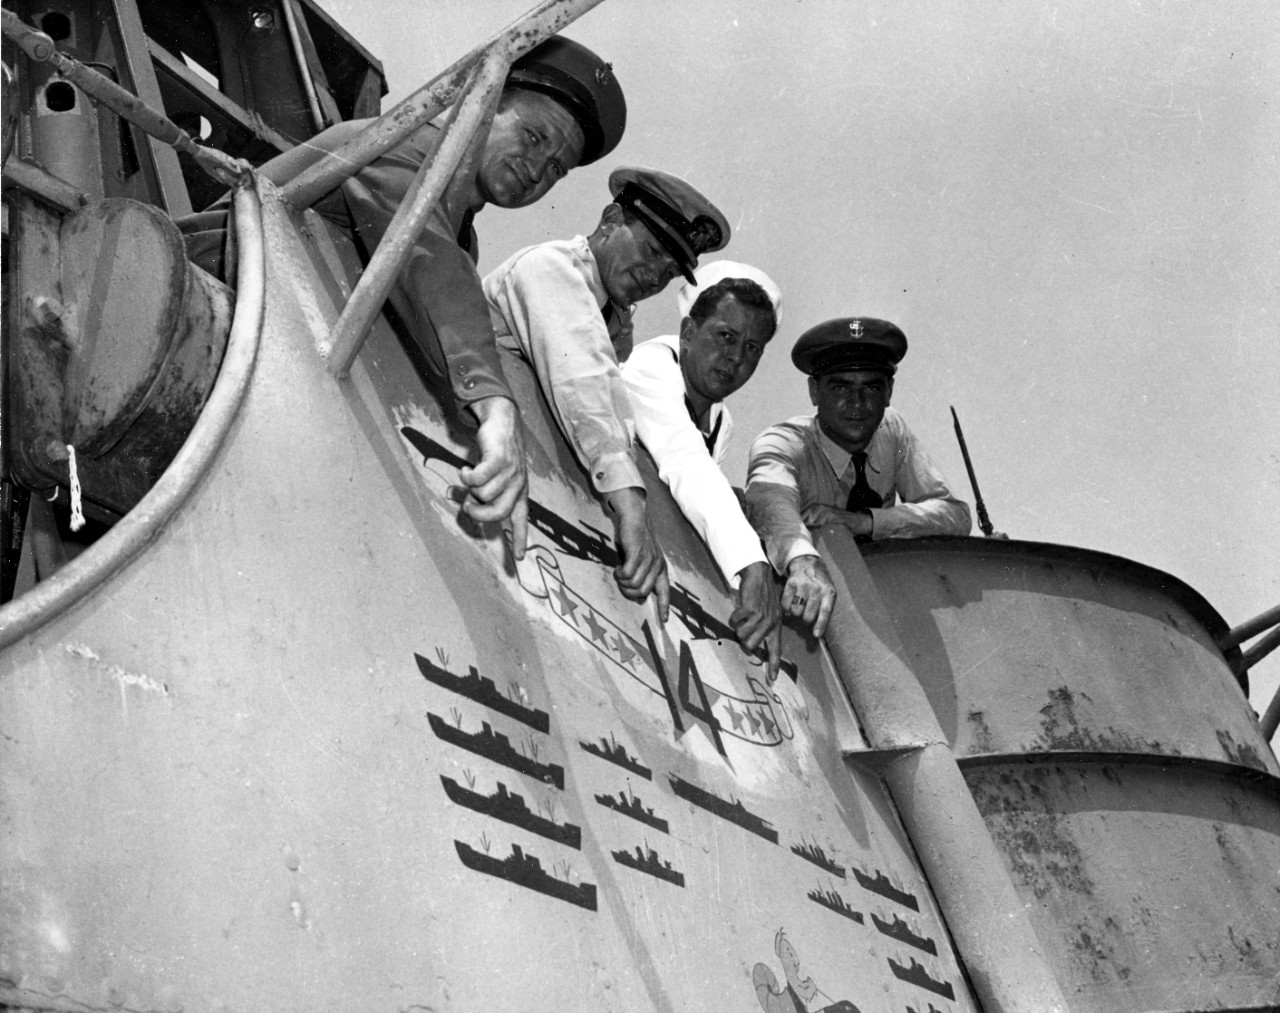 Unidentified members of Nautilus’s crew point proudly to the “scoreboard” painted in the boat’s conning tower, 26 January 1946. Note cartoon insignia almost out of view at the bottom of the image, of a smiling aquatic creature wearing a “dixie cup” sailor hat. (U.S. Navy Photograph 80-G-701714, National Archives and Records Administration, Still Pictures Division, College Park, Md.)